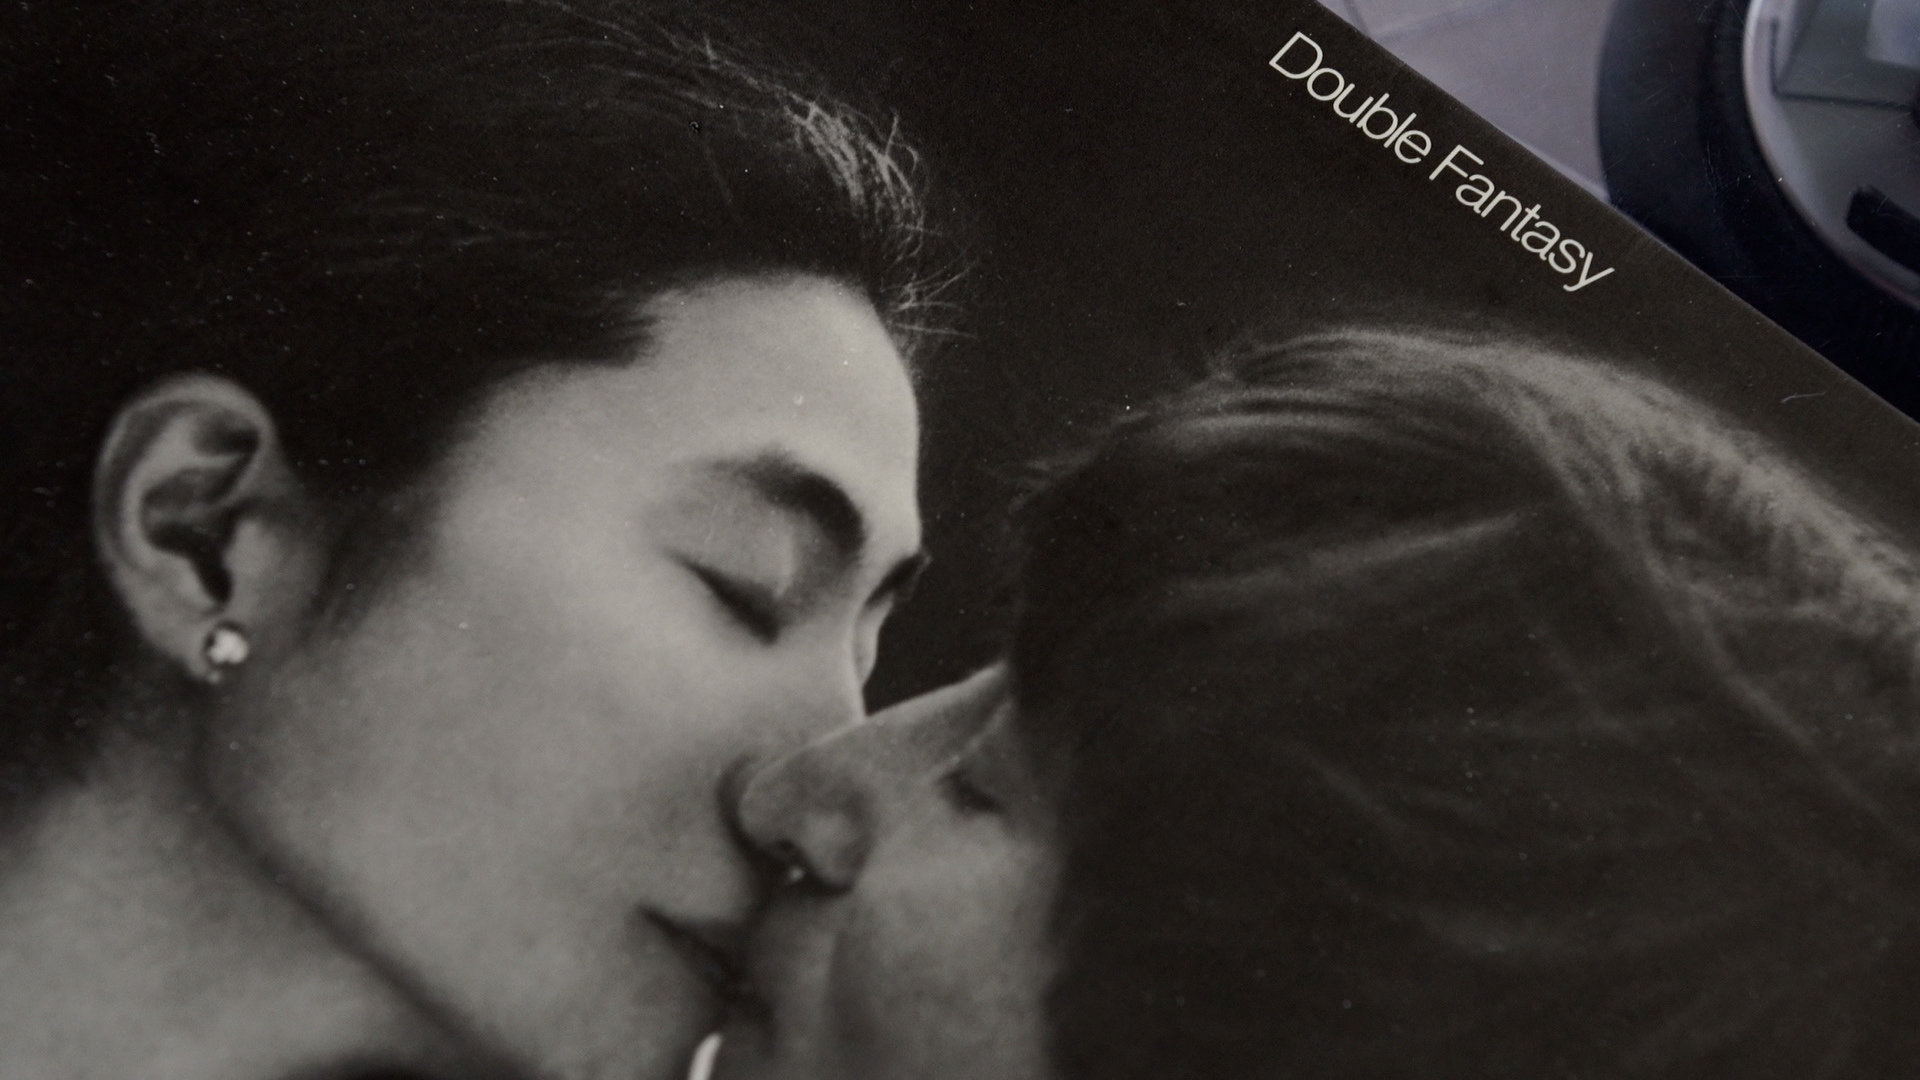 John Lennons Double Fantasy comeback with Yoko Ono still intrigues, 40 years after his death